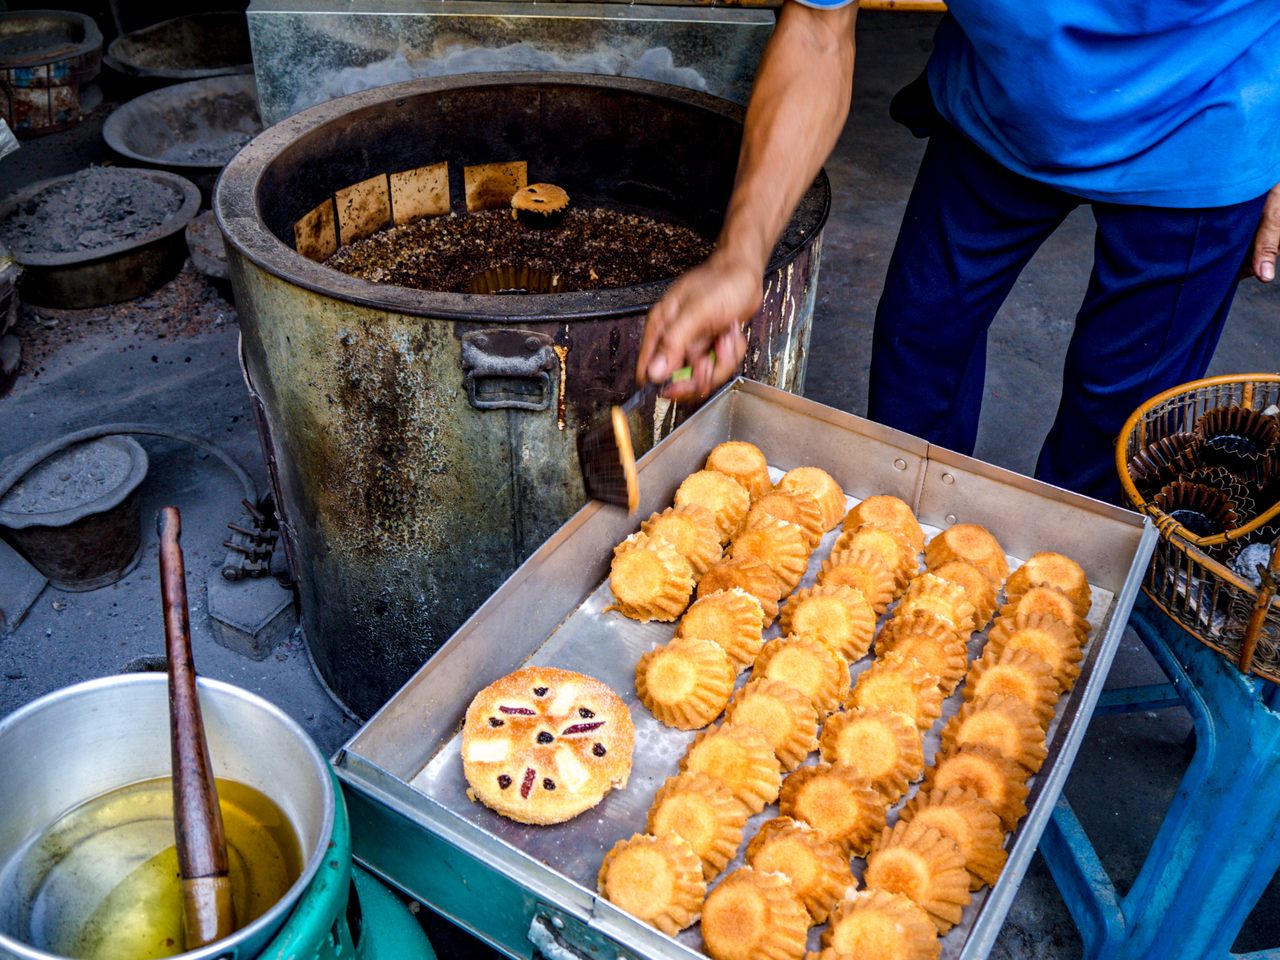 A baker at Kanoom Farung Lan Mea Pao picks freshly baked cakes out of the charcoal brazier and moves them to a metal box to cool.